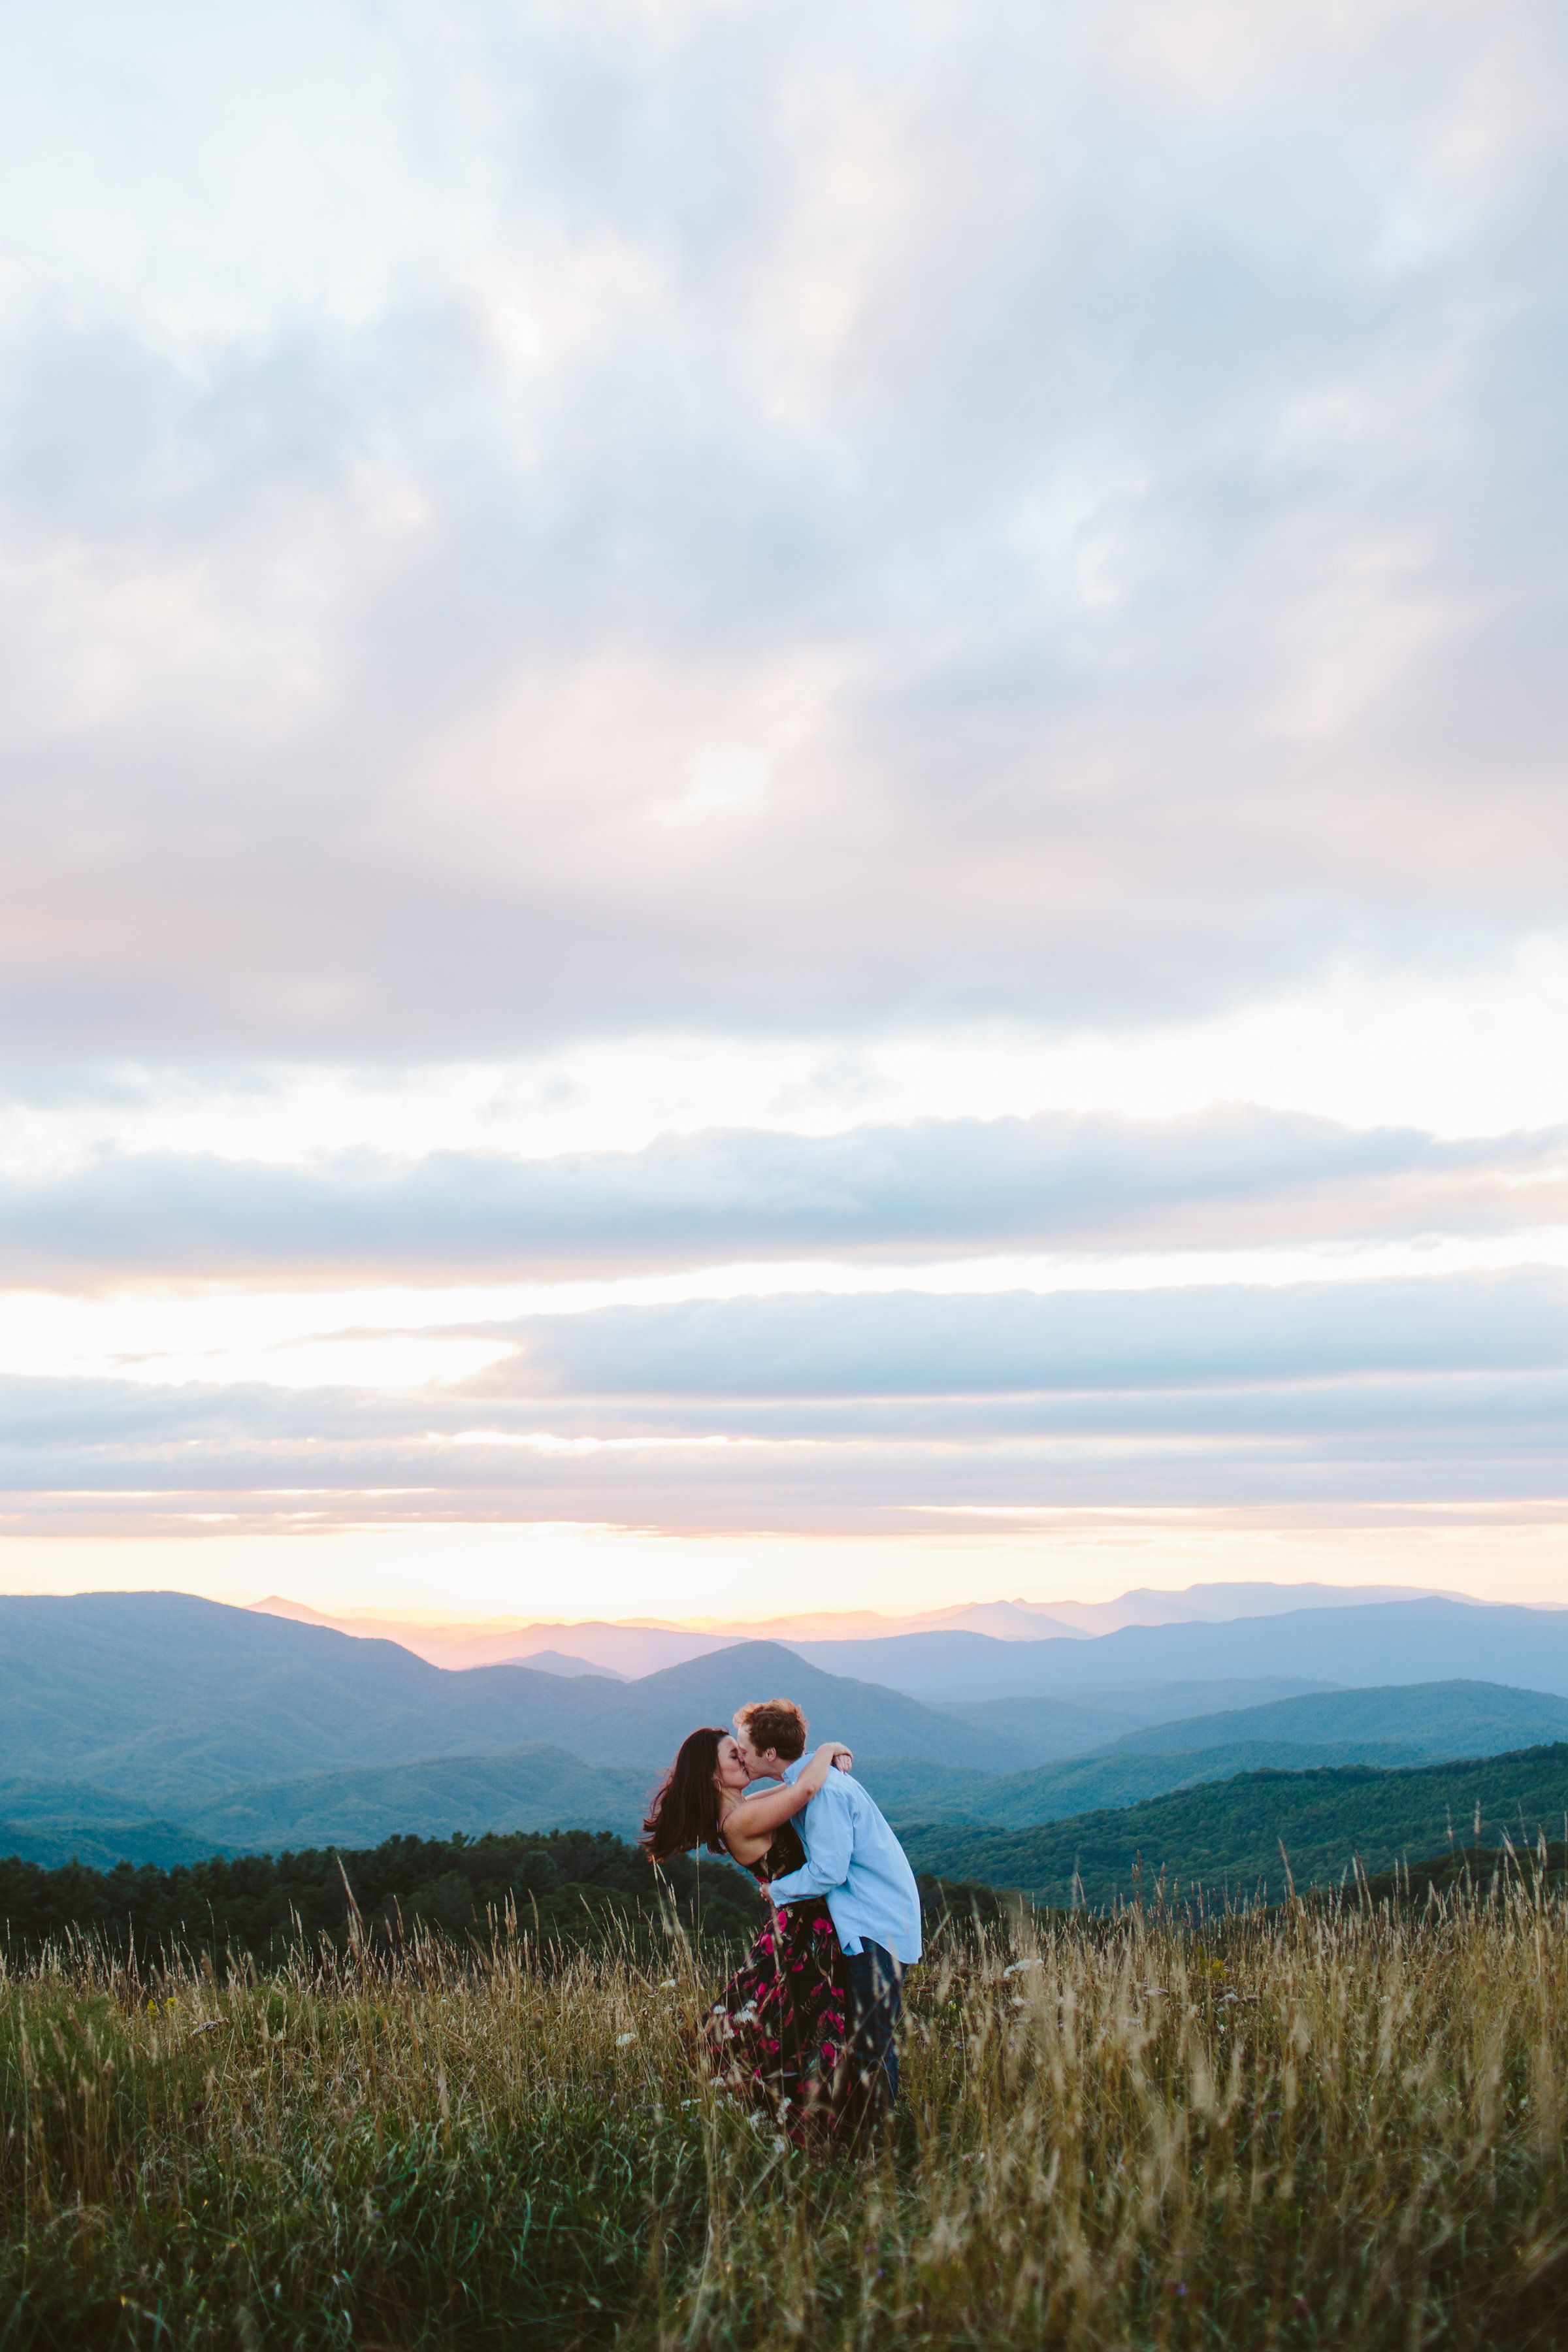 Max Patch Summer Engagement Photos on the Mountain at Sunset couple kissing